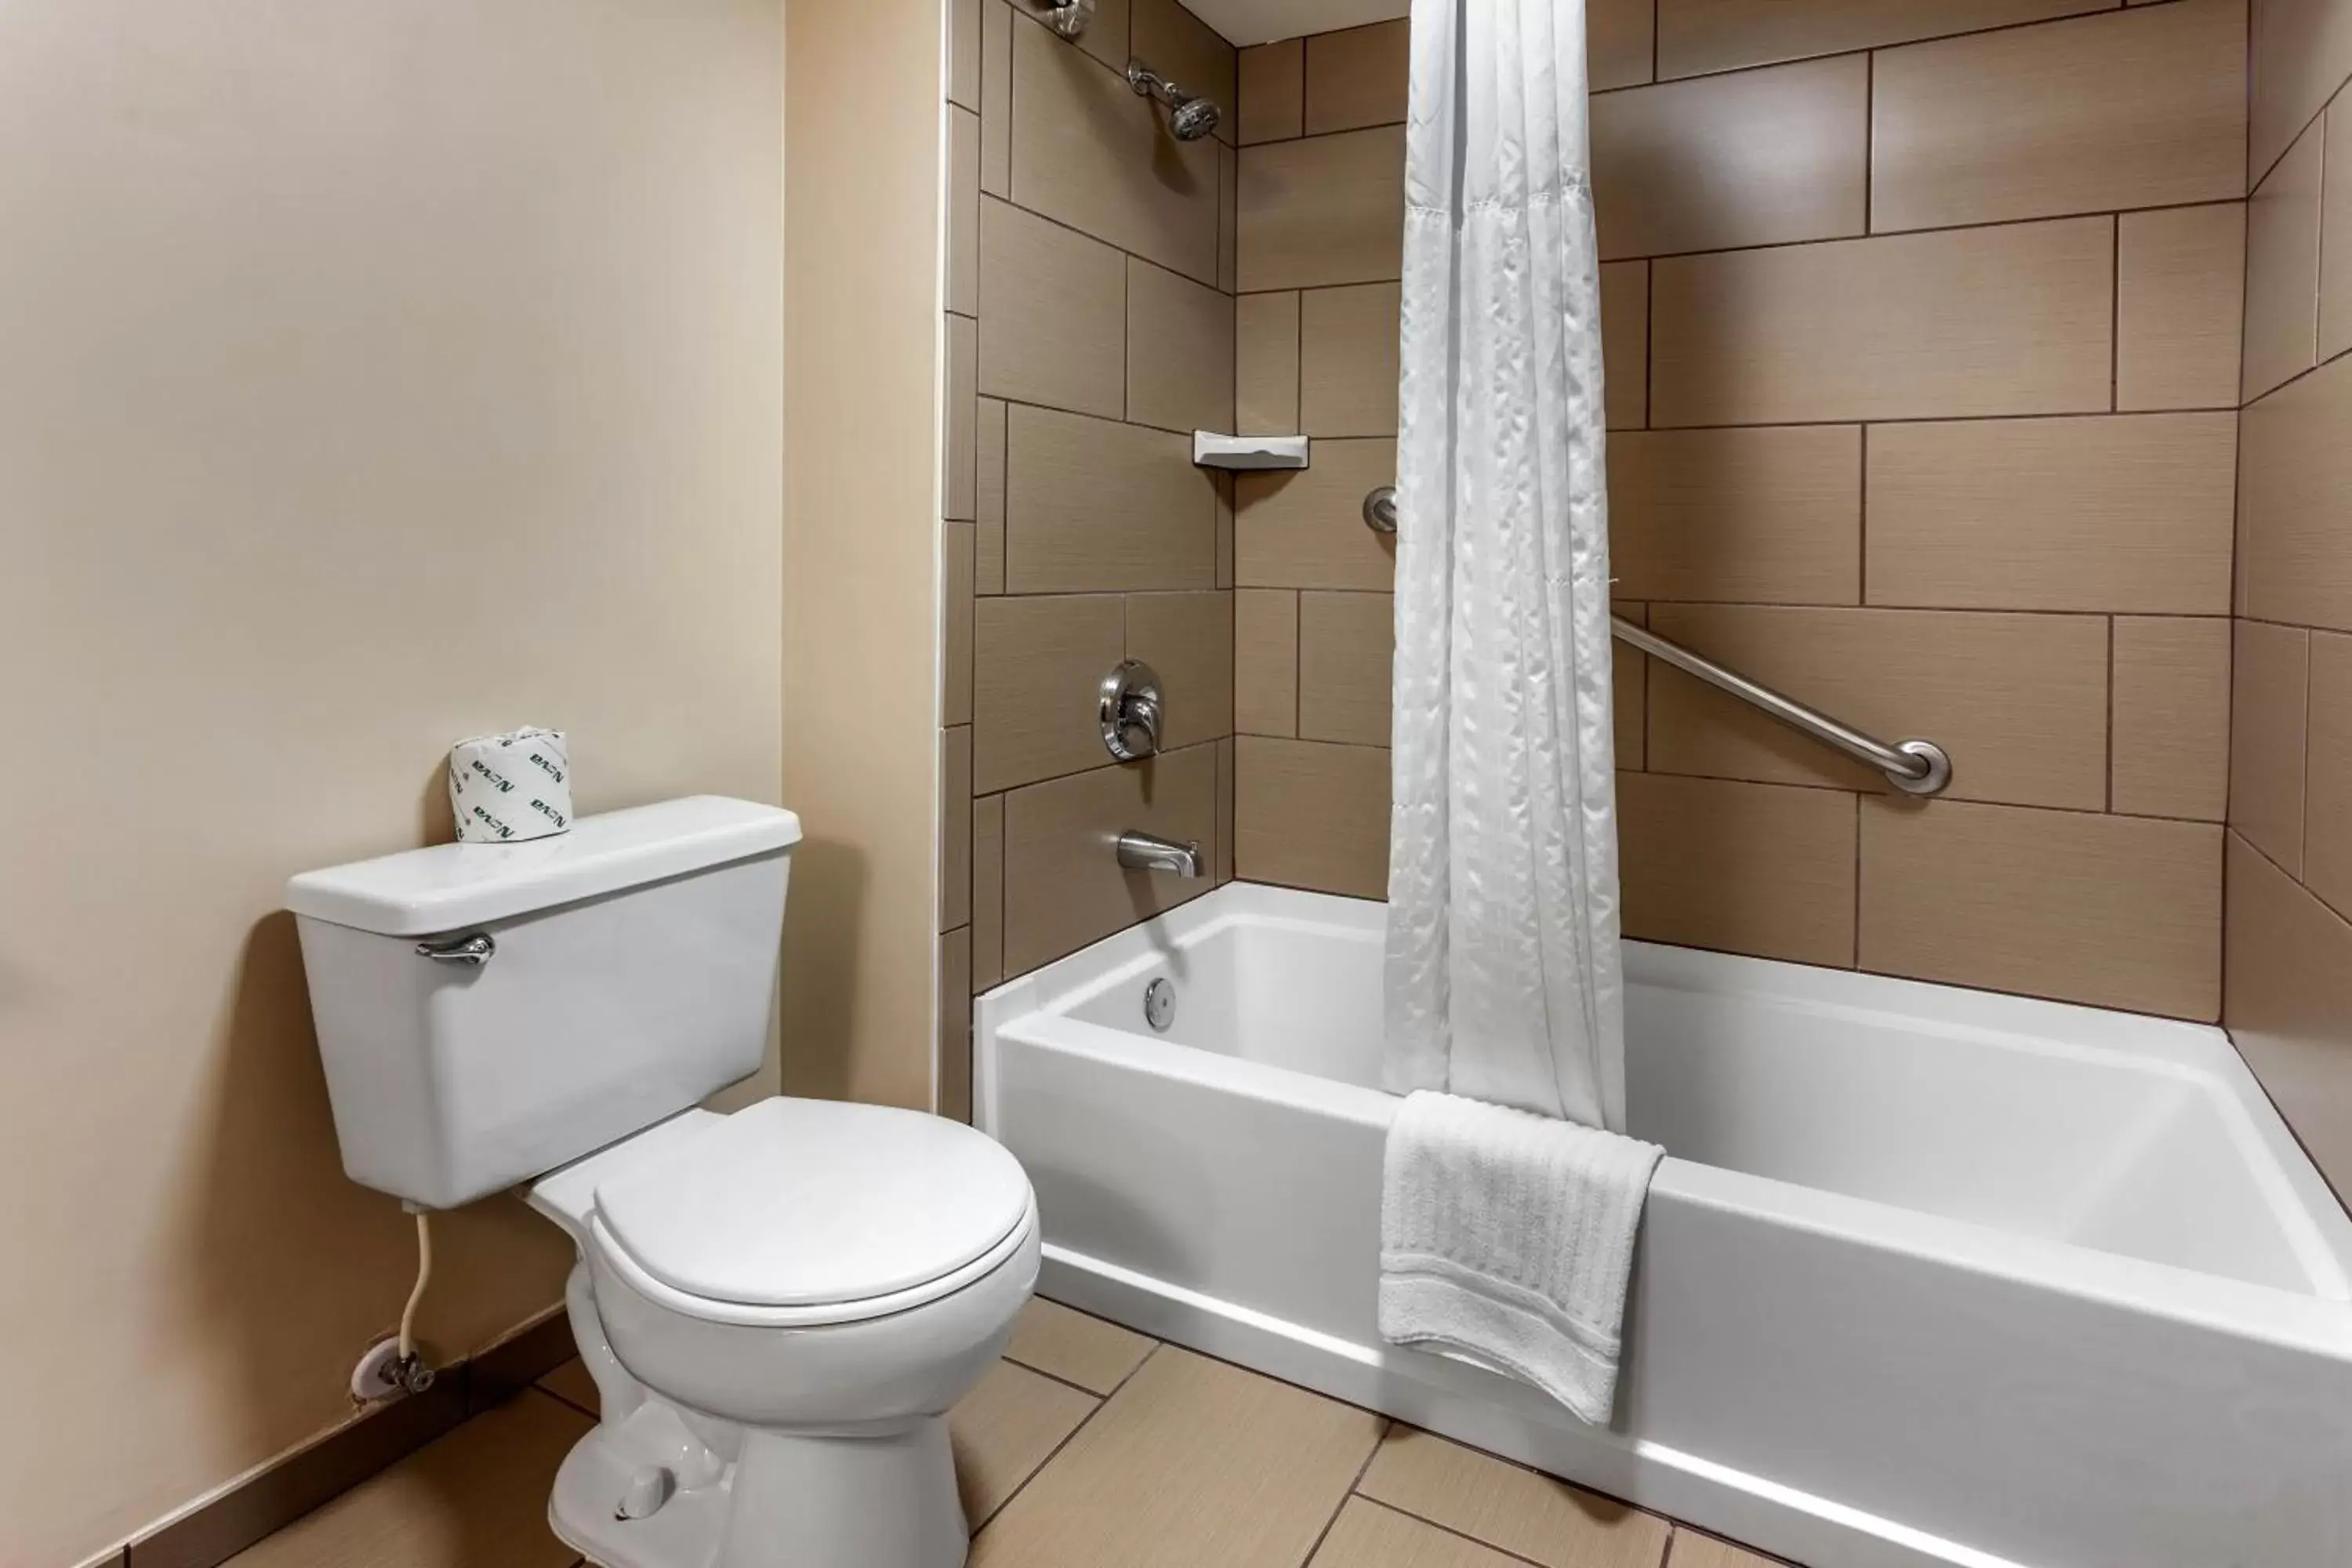 Queen Suite with Two Queen Beds and Sofa Bed - Non-Smoking in Comfort Inn Layton - Salt Lake City